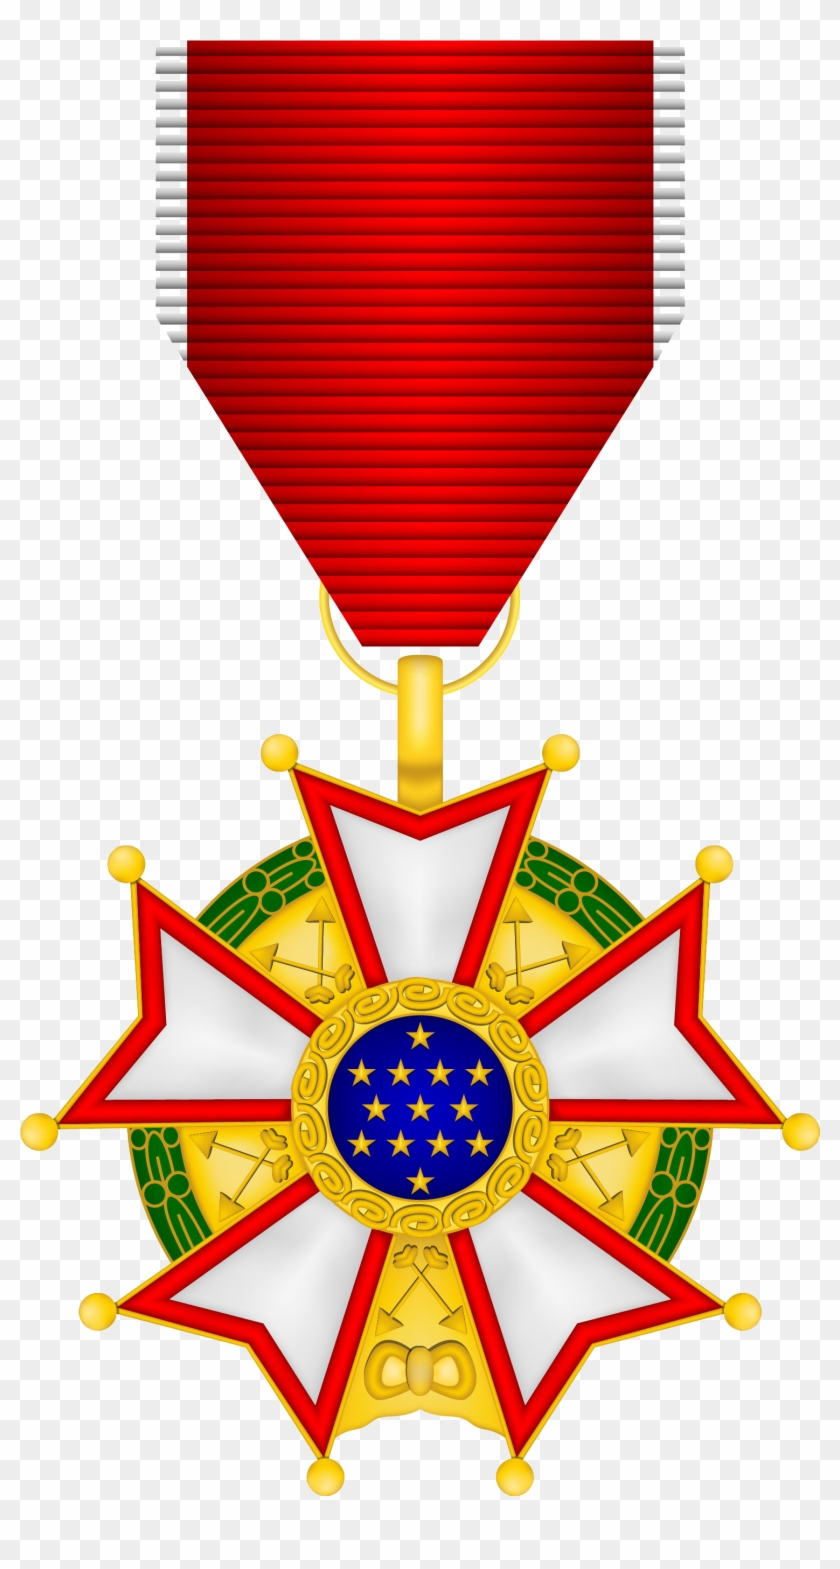 United States Armed Forces Legion Of Merit Military - United States Armed Forces Legion Of Merit Military #594251